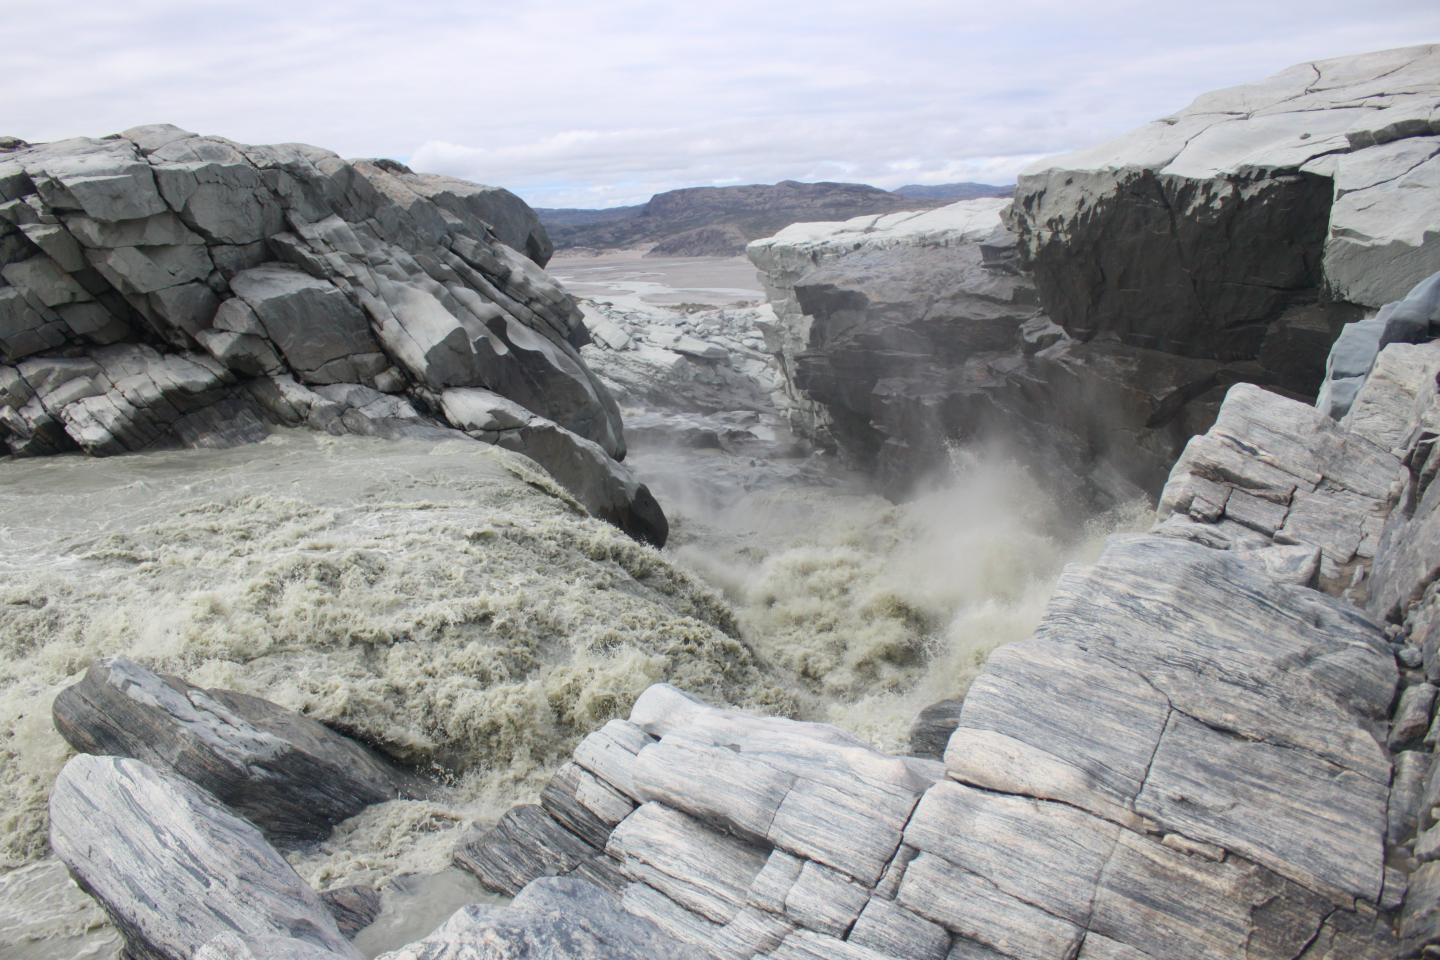 A glacial meltwater river drained from Greenland Ice Sheet